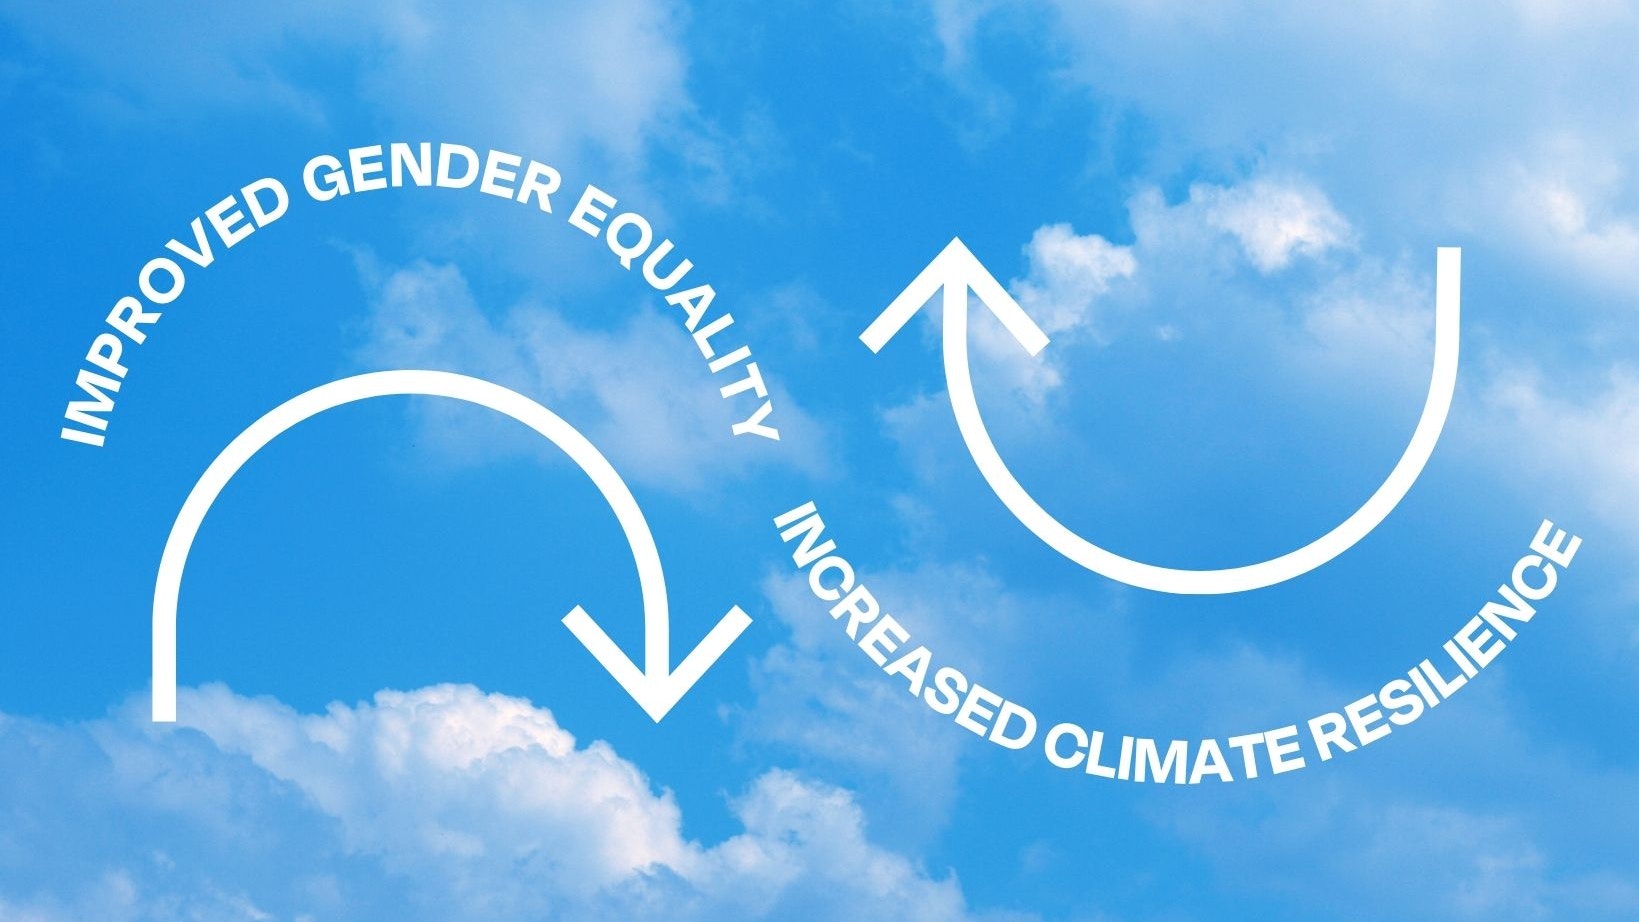 Addressing The Gender Gap To Fight Climate Change